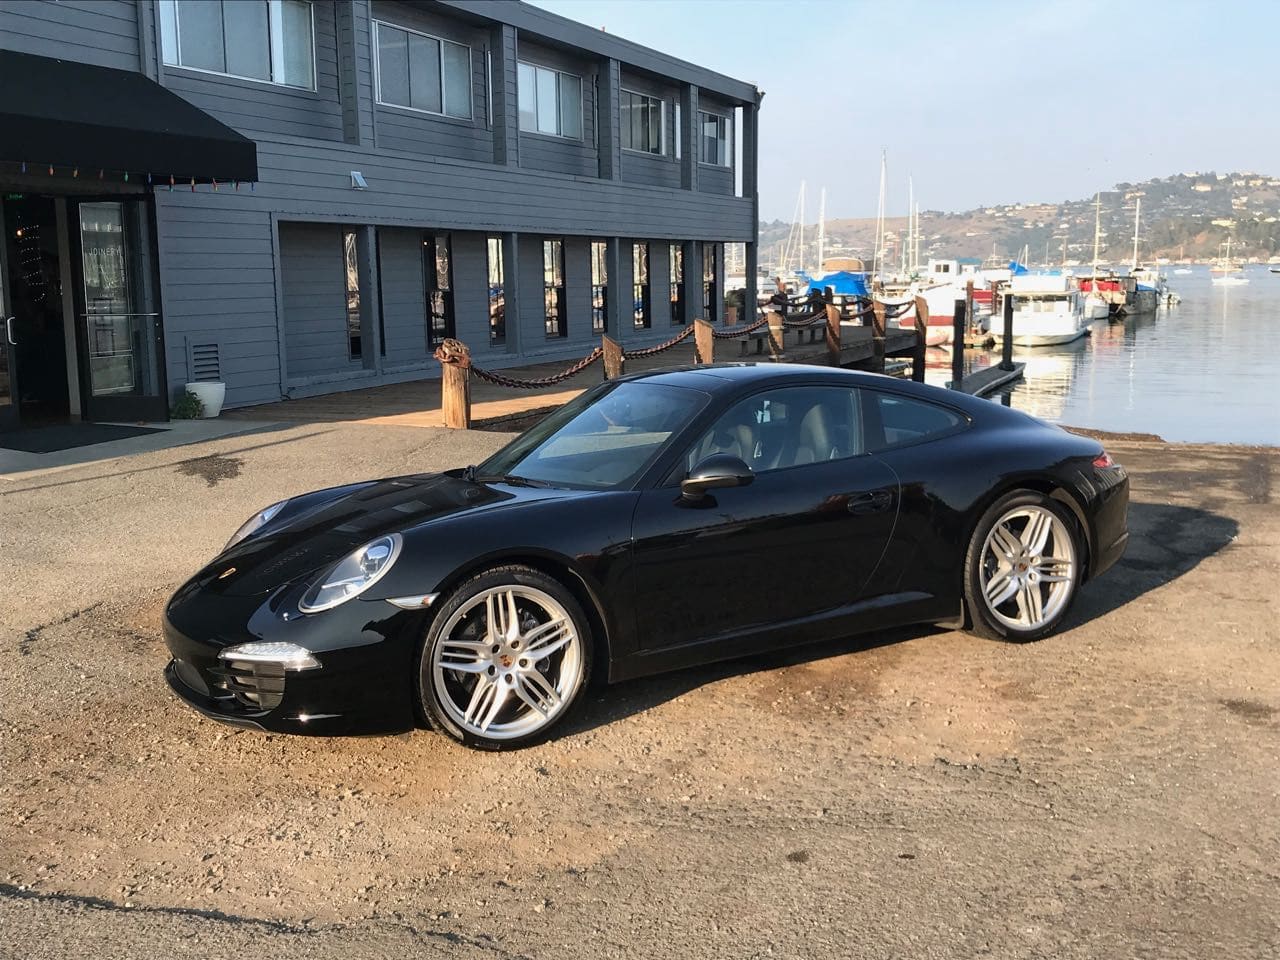 2014 Porsche 911 - 2014 Porsche 911 Model 991 - CPO until end of March 2020 - Low Mileage - Used - VIN WP0AA2A91ES106804 - 6 cyl - 2WD - Automatic - Coupe - Black - Sausalito, CA 94965, United States